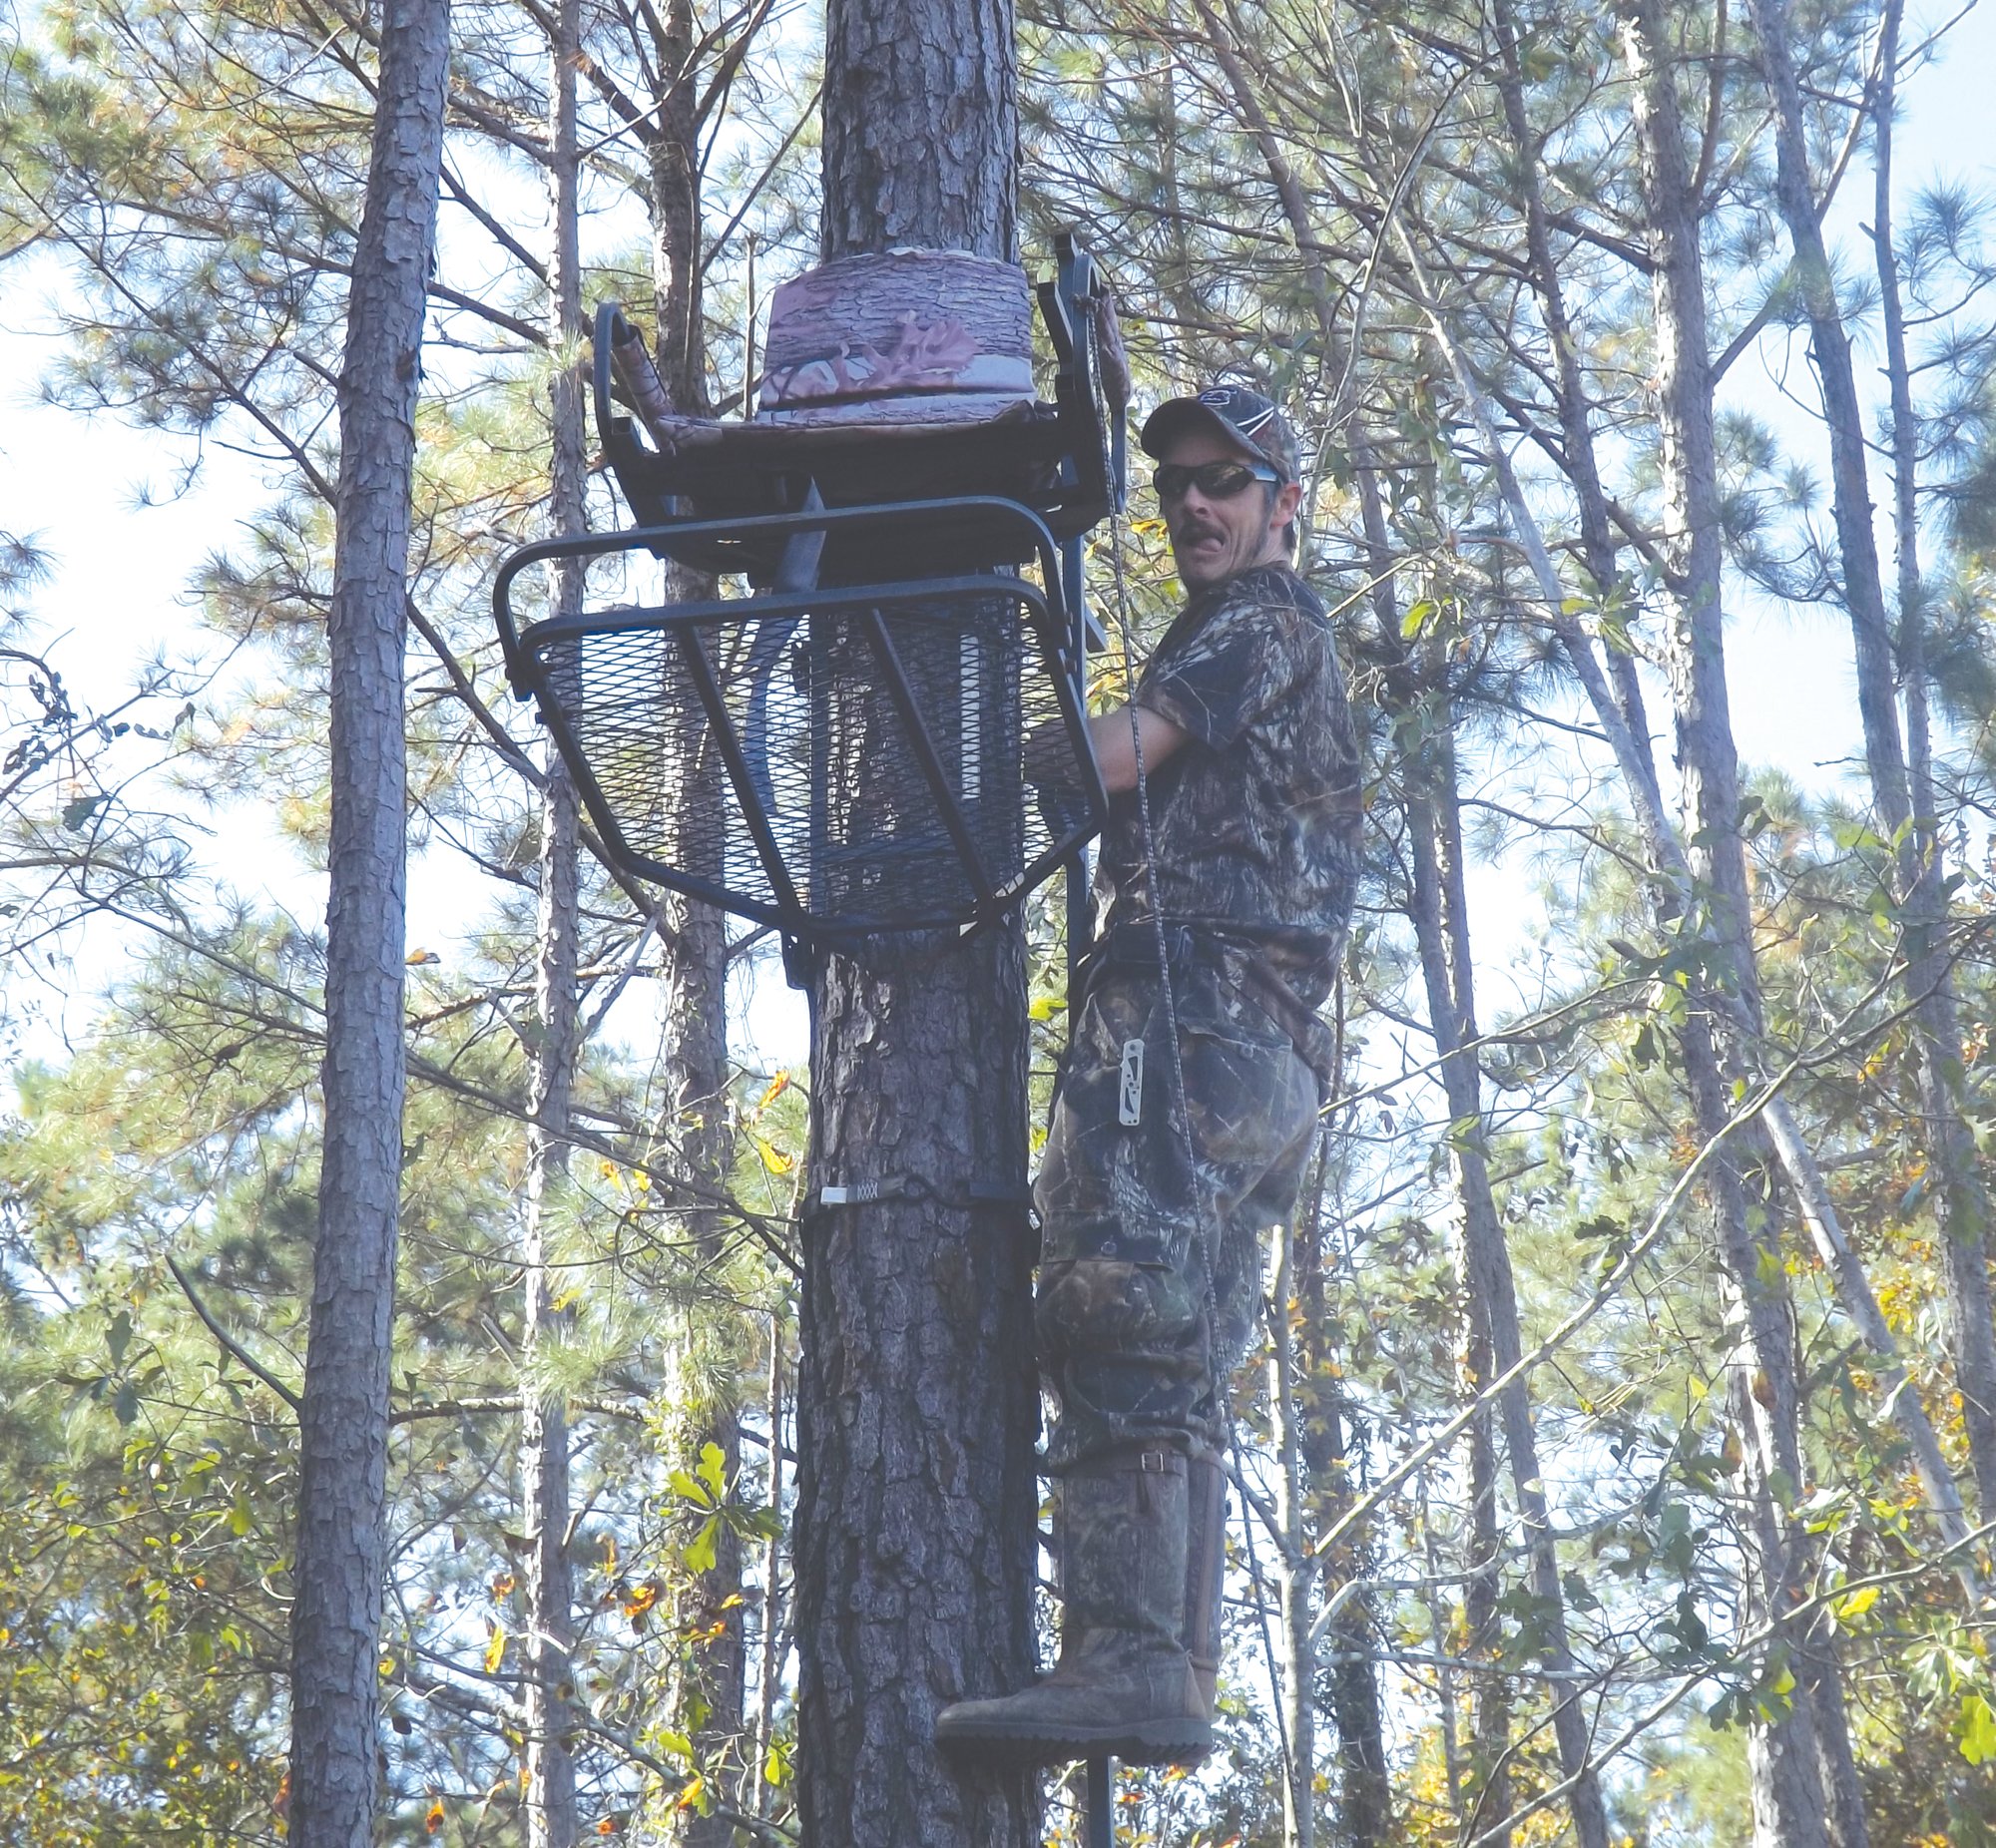 Clayton Geddings checks out a deer stand before the season starts.